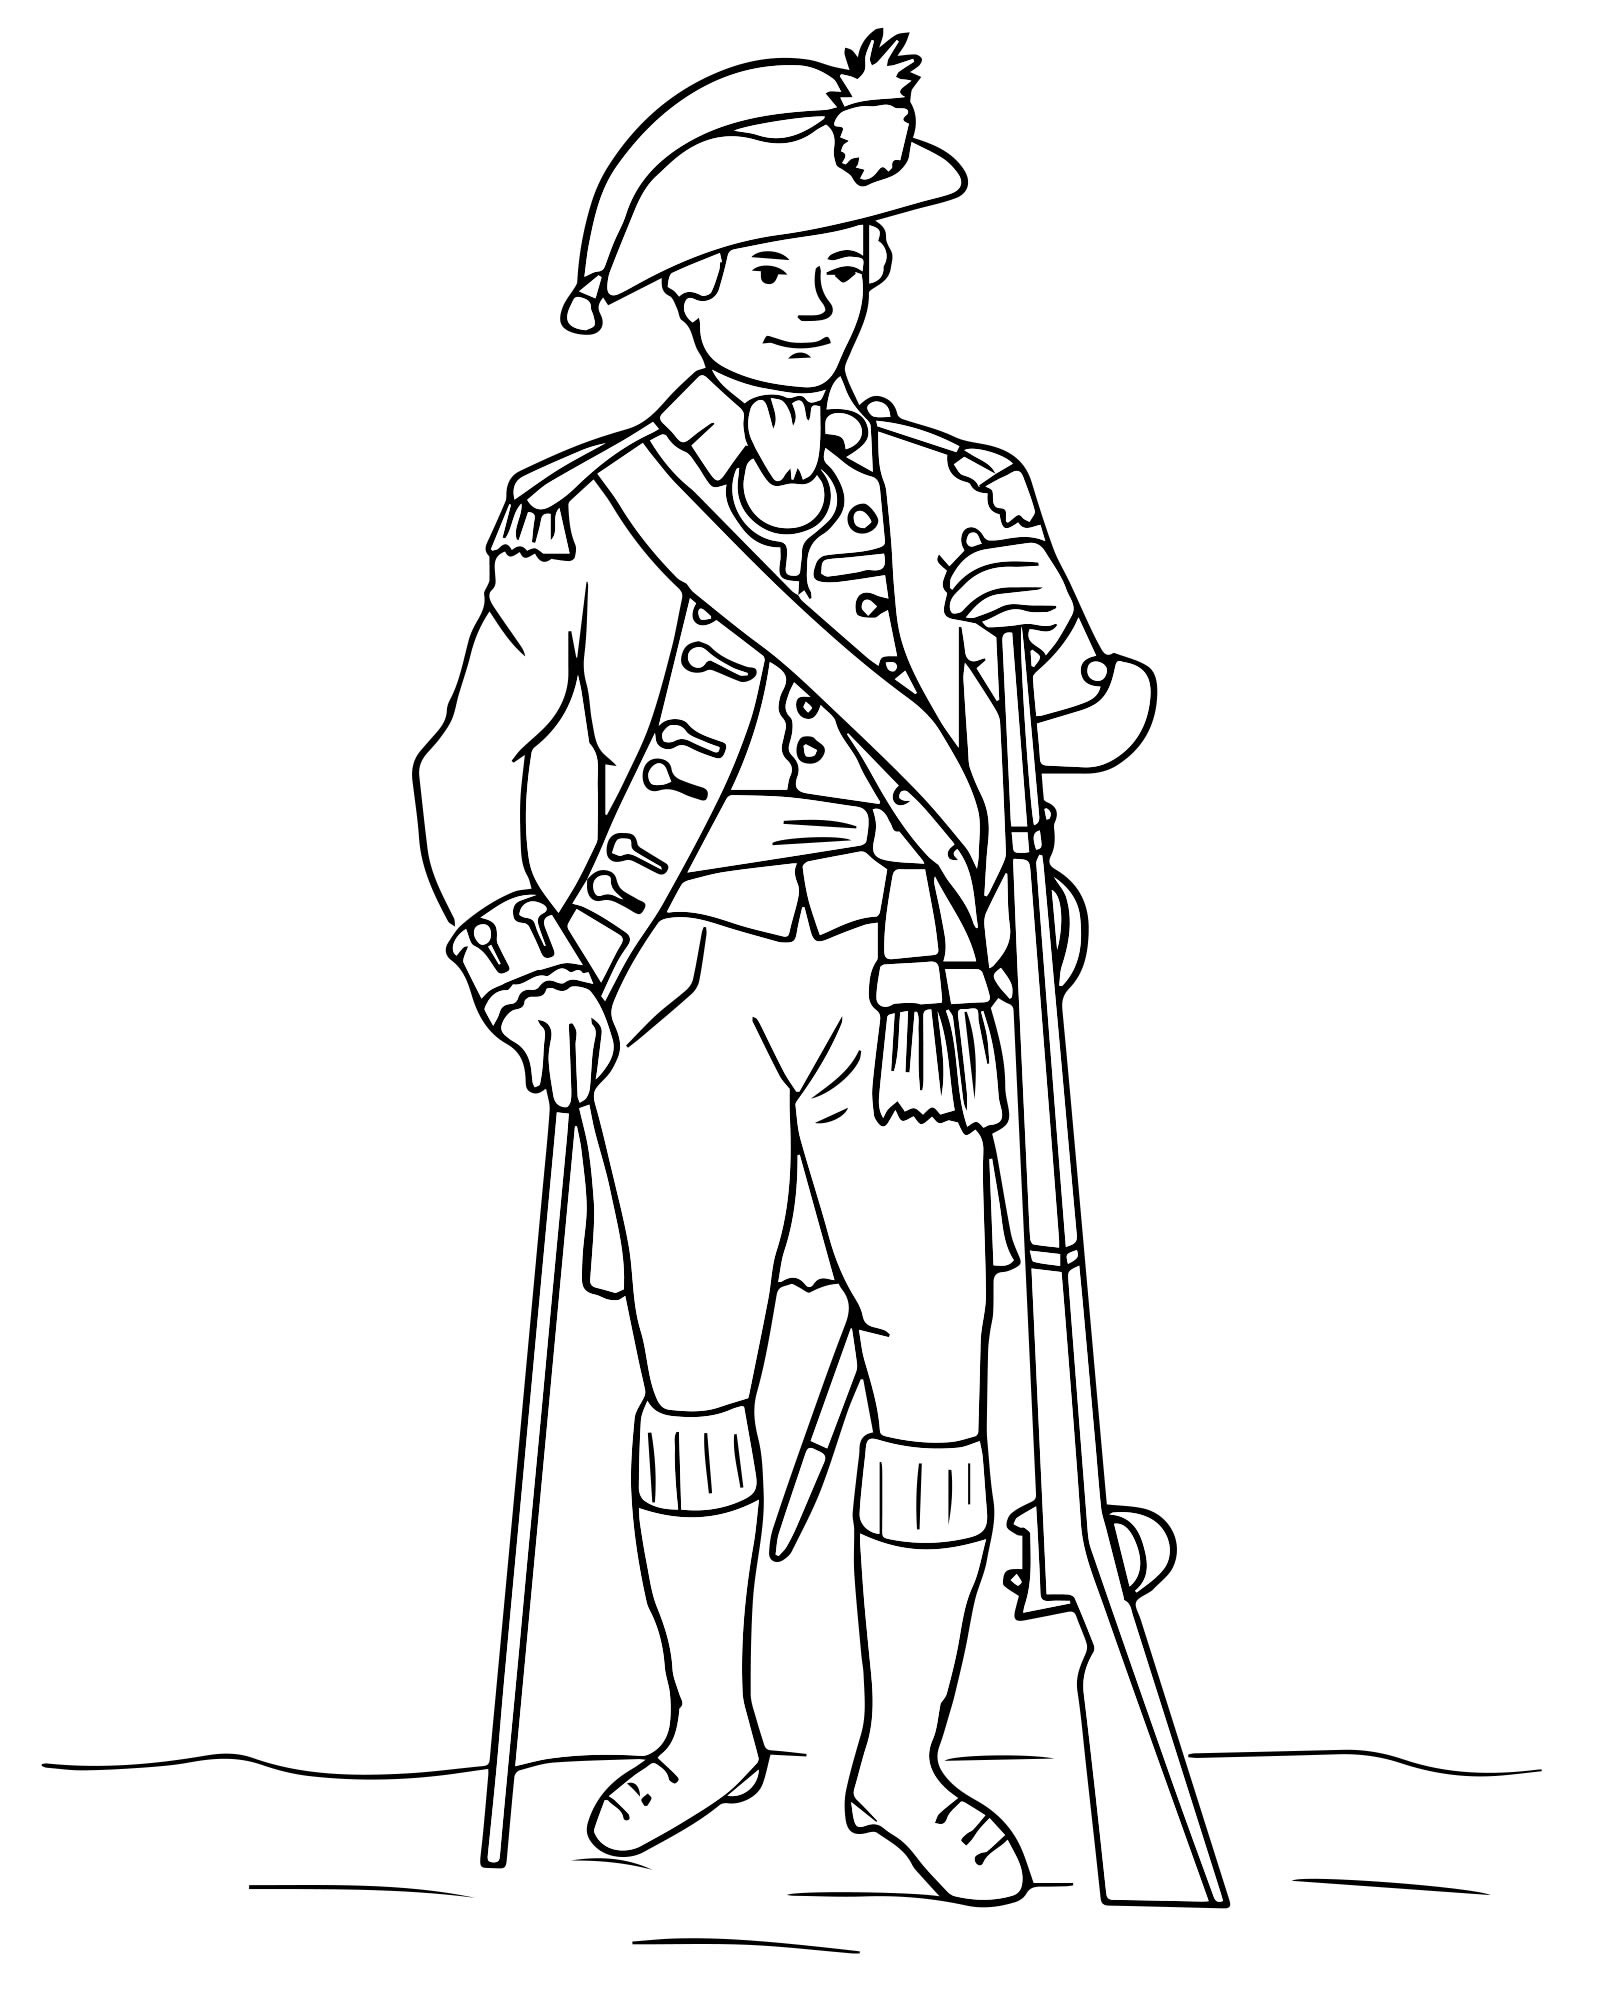 Royal soldier and child coloring page